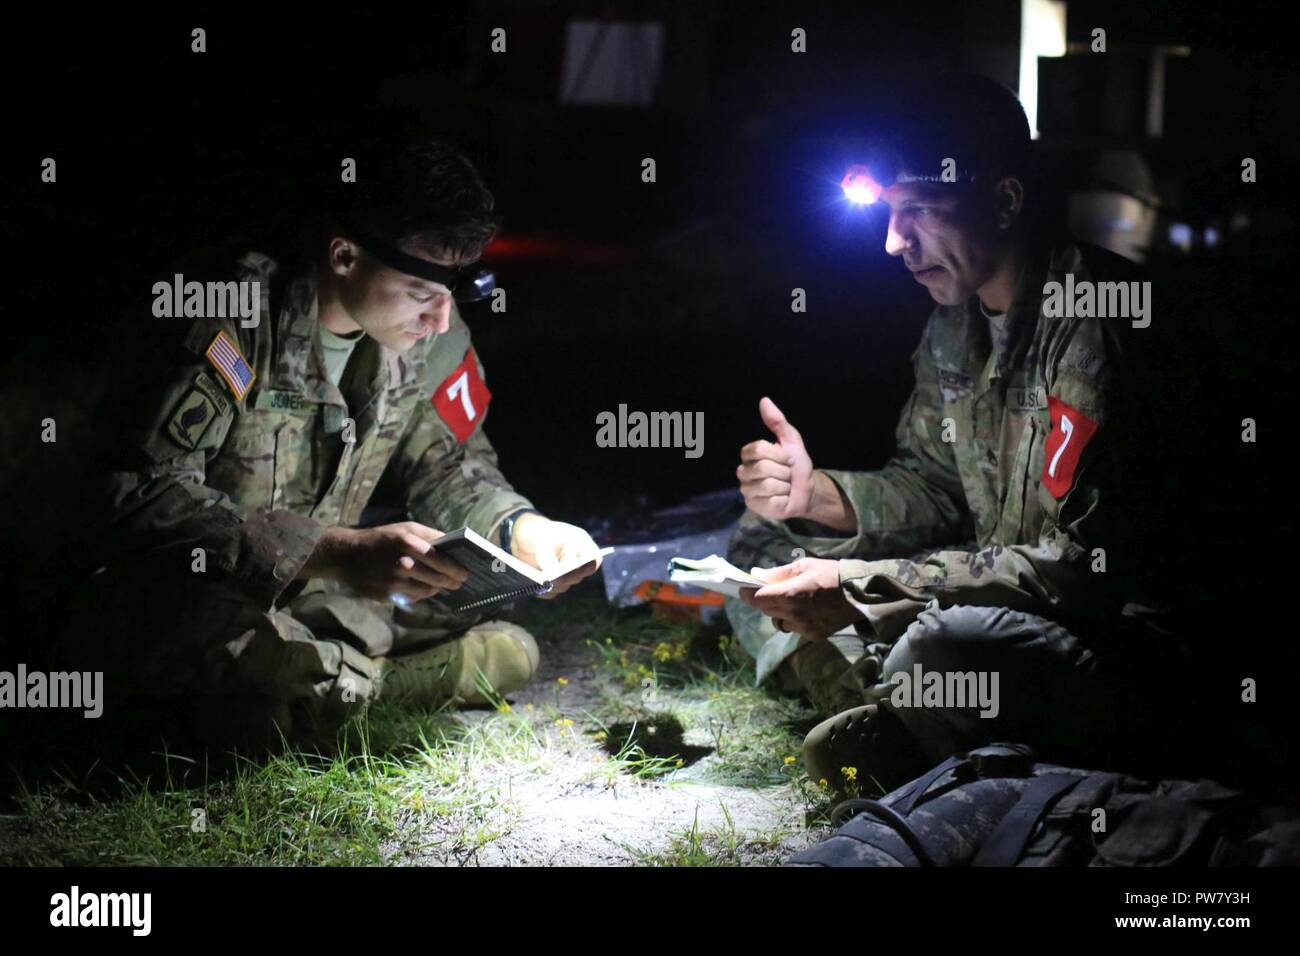 U.S. Army Staff Sgt. Eric Jonier and Staff Sgt. Mkakauet Generauax, both assigned to the Lyster Army Community Hospital, look over notes before the simulated Mass Casualty Event during the 2017 Best Medic Competition at Fort Bragg, N.C., Sep. 18-21, 2017. The competition tested the physical and mental toughness, as well as the technical competence, of each medic to identify the team moving forward to represent the region at the next level of the competition. Stock Photo